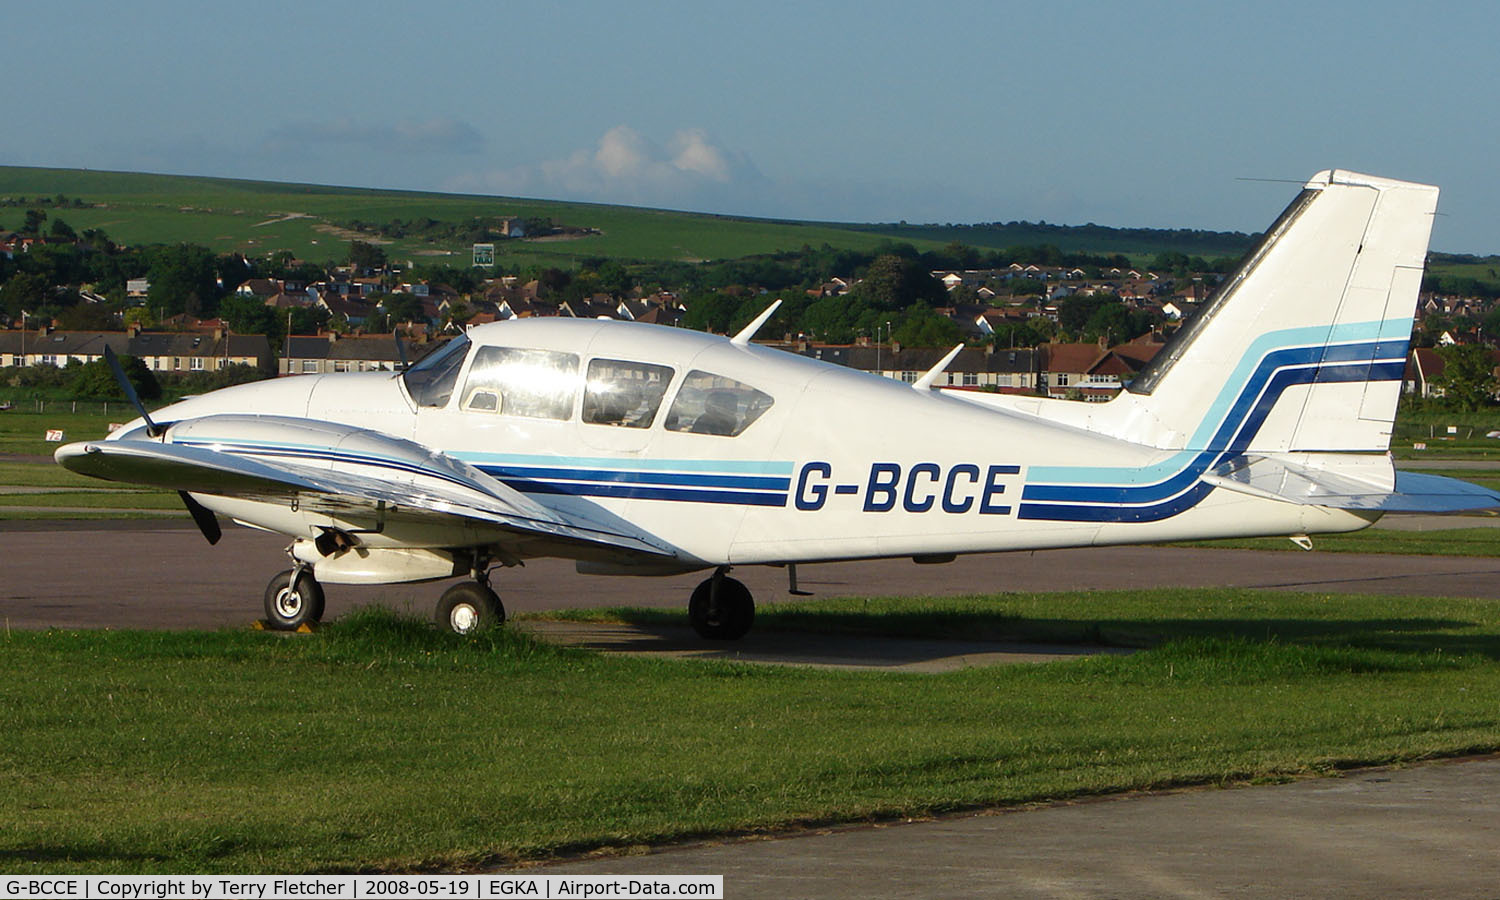 G-BCCE, 1973 Piper PA-23-250 Aztec E C/N 27-7405282, A pleasant May evening at Shoreham Airport , Sussex , UK